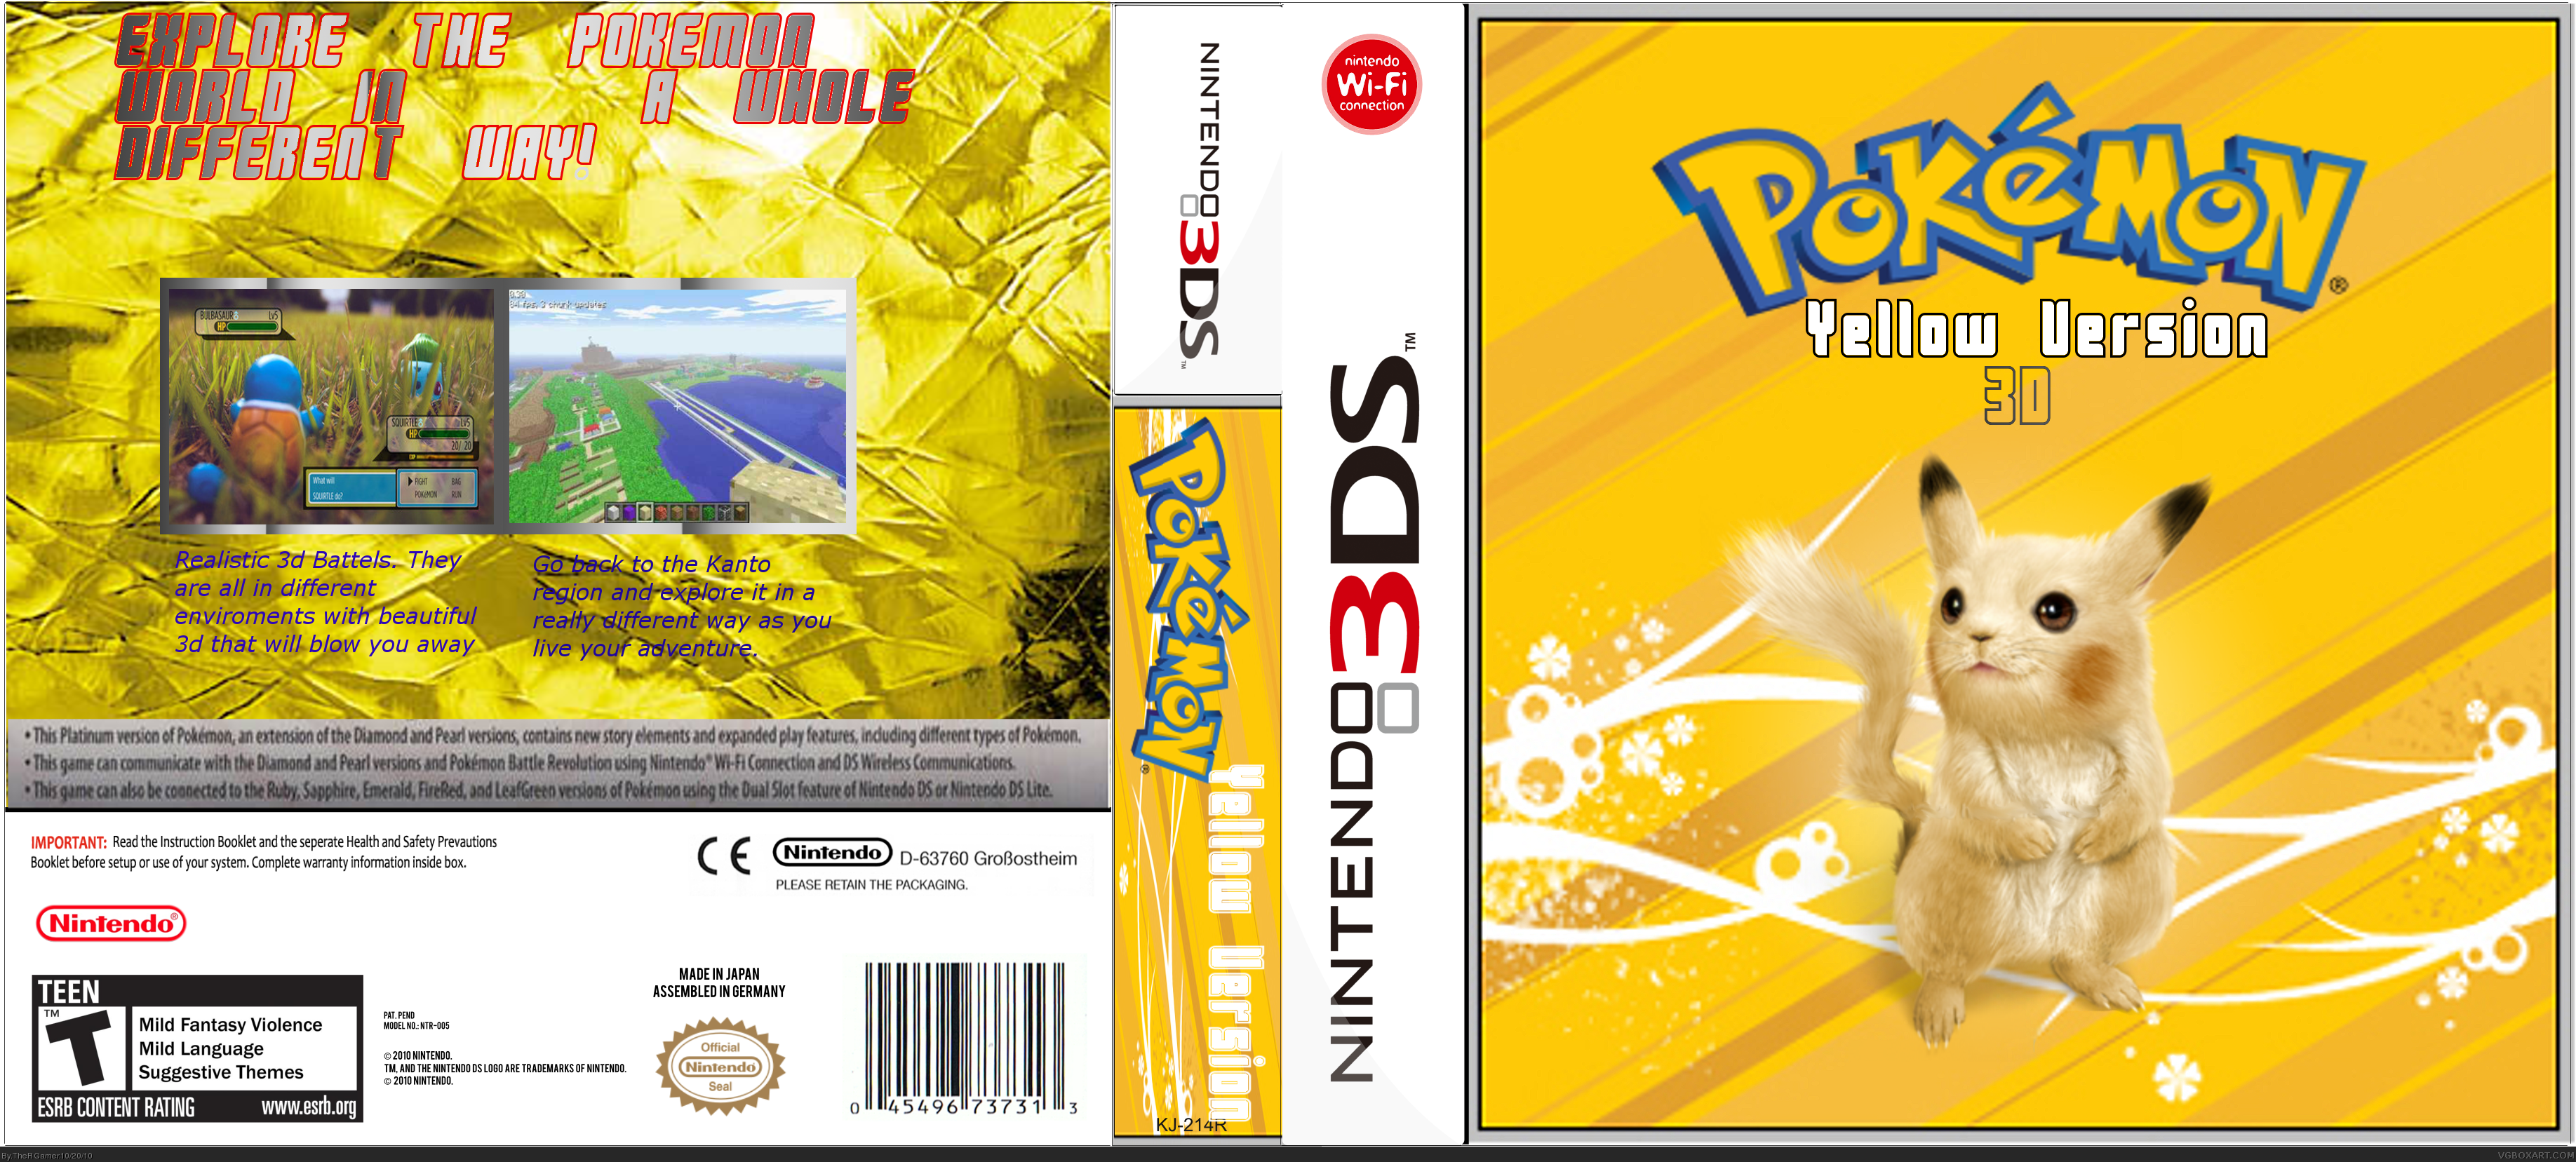 See Out The New Pokemon Yellow HD Wallpaper And Photos At 99volo